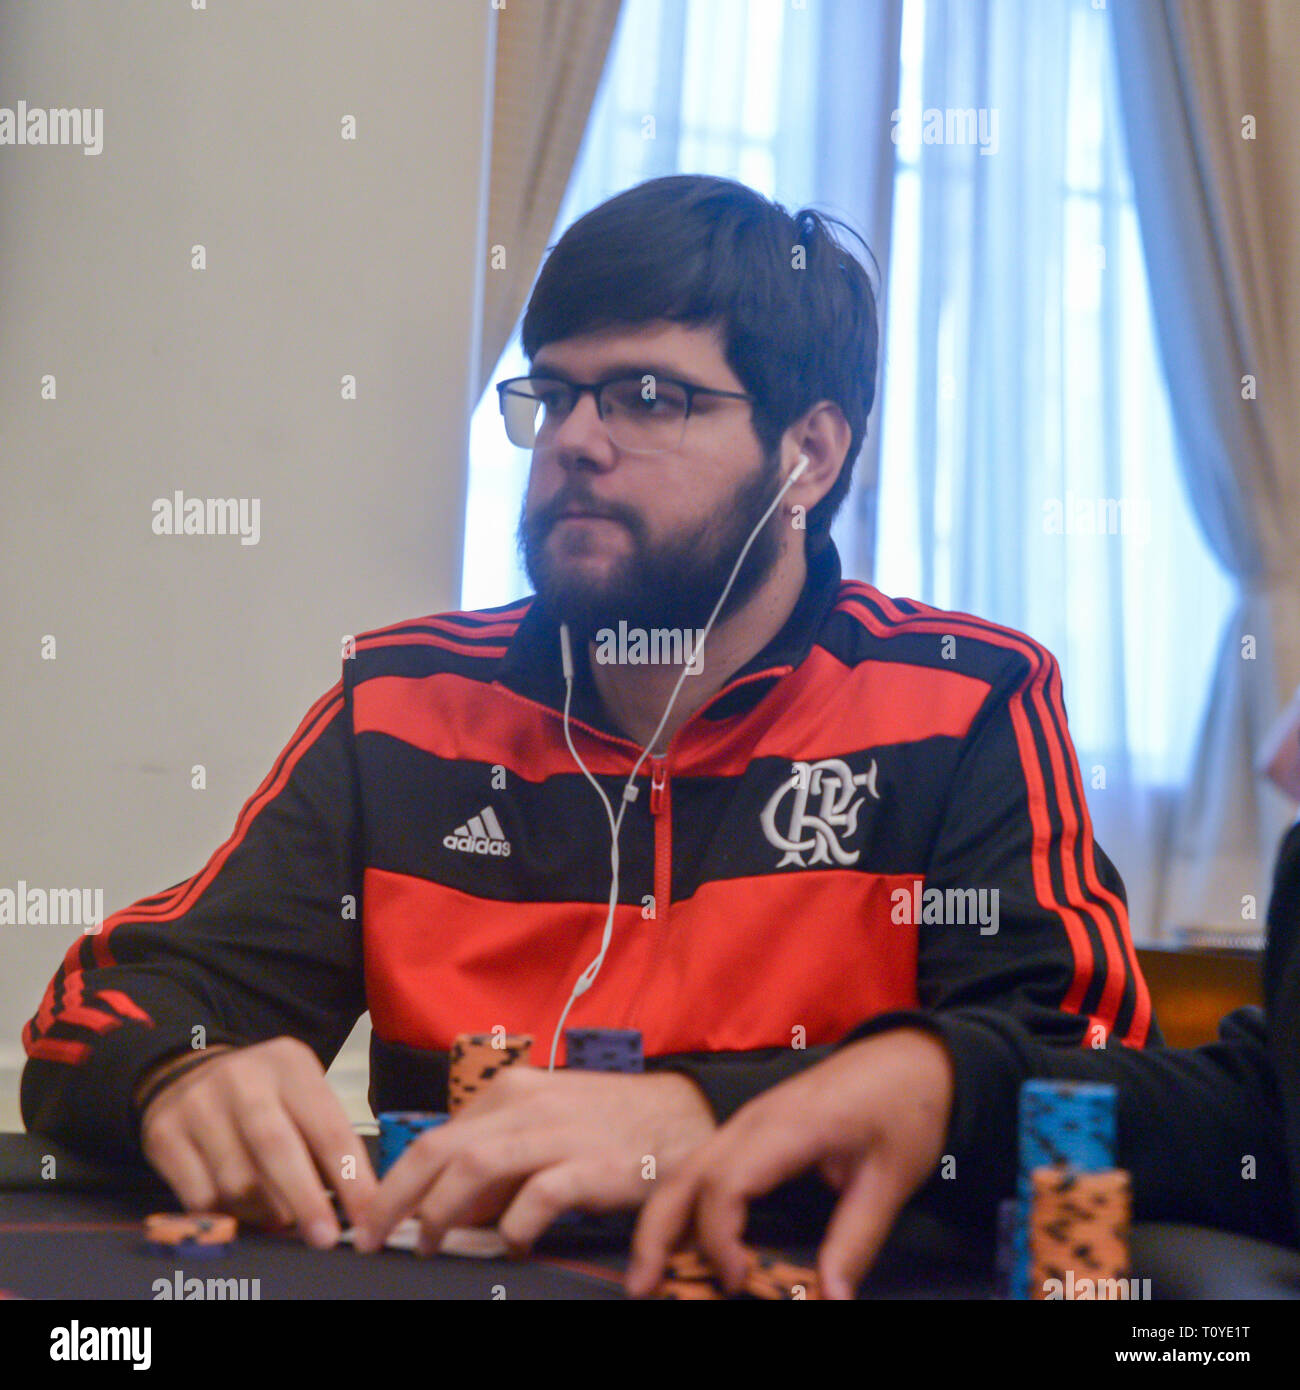 Rio de Janeiro, Brazil - March 21st, 2019: Poker Player wearing a flamengo jersey at the Main Event of the PartyPoker LIVE MILLIONS South America 2019 occuring at the luxurious Copacabana Palace Belmond Hotel in Rio de Janeiro, Brazil from March 15th through March 24th, 2019. Credit: Alexandre Rotenberg/Alamy Live News Stock Photo